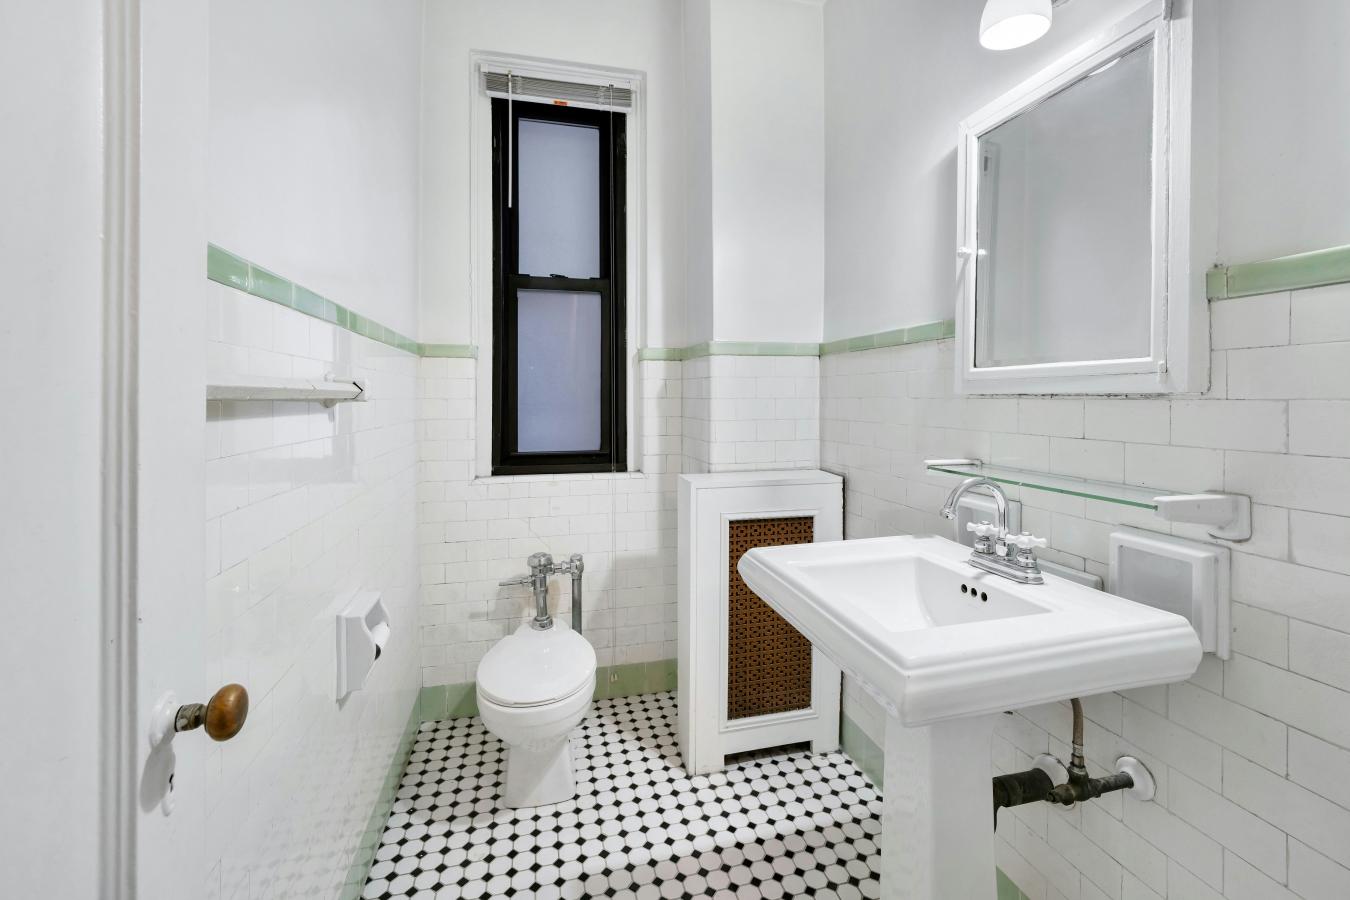 262 CENTRAL PARK WEST, New York, New York, 10024, United States, ,1 BathroomBathrooms,Residential,For Sale,262 CENTRAL PARK WEST,1483633